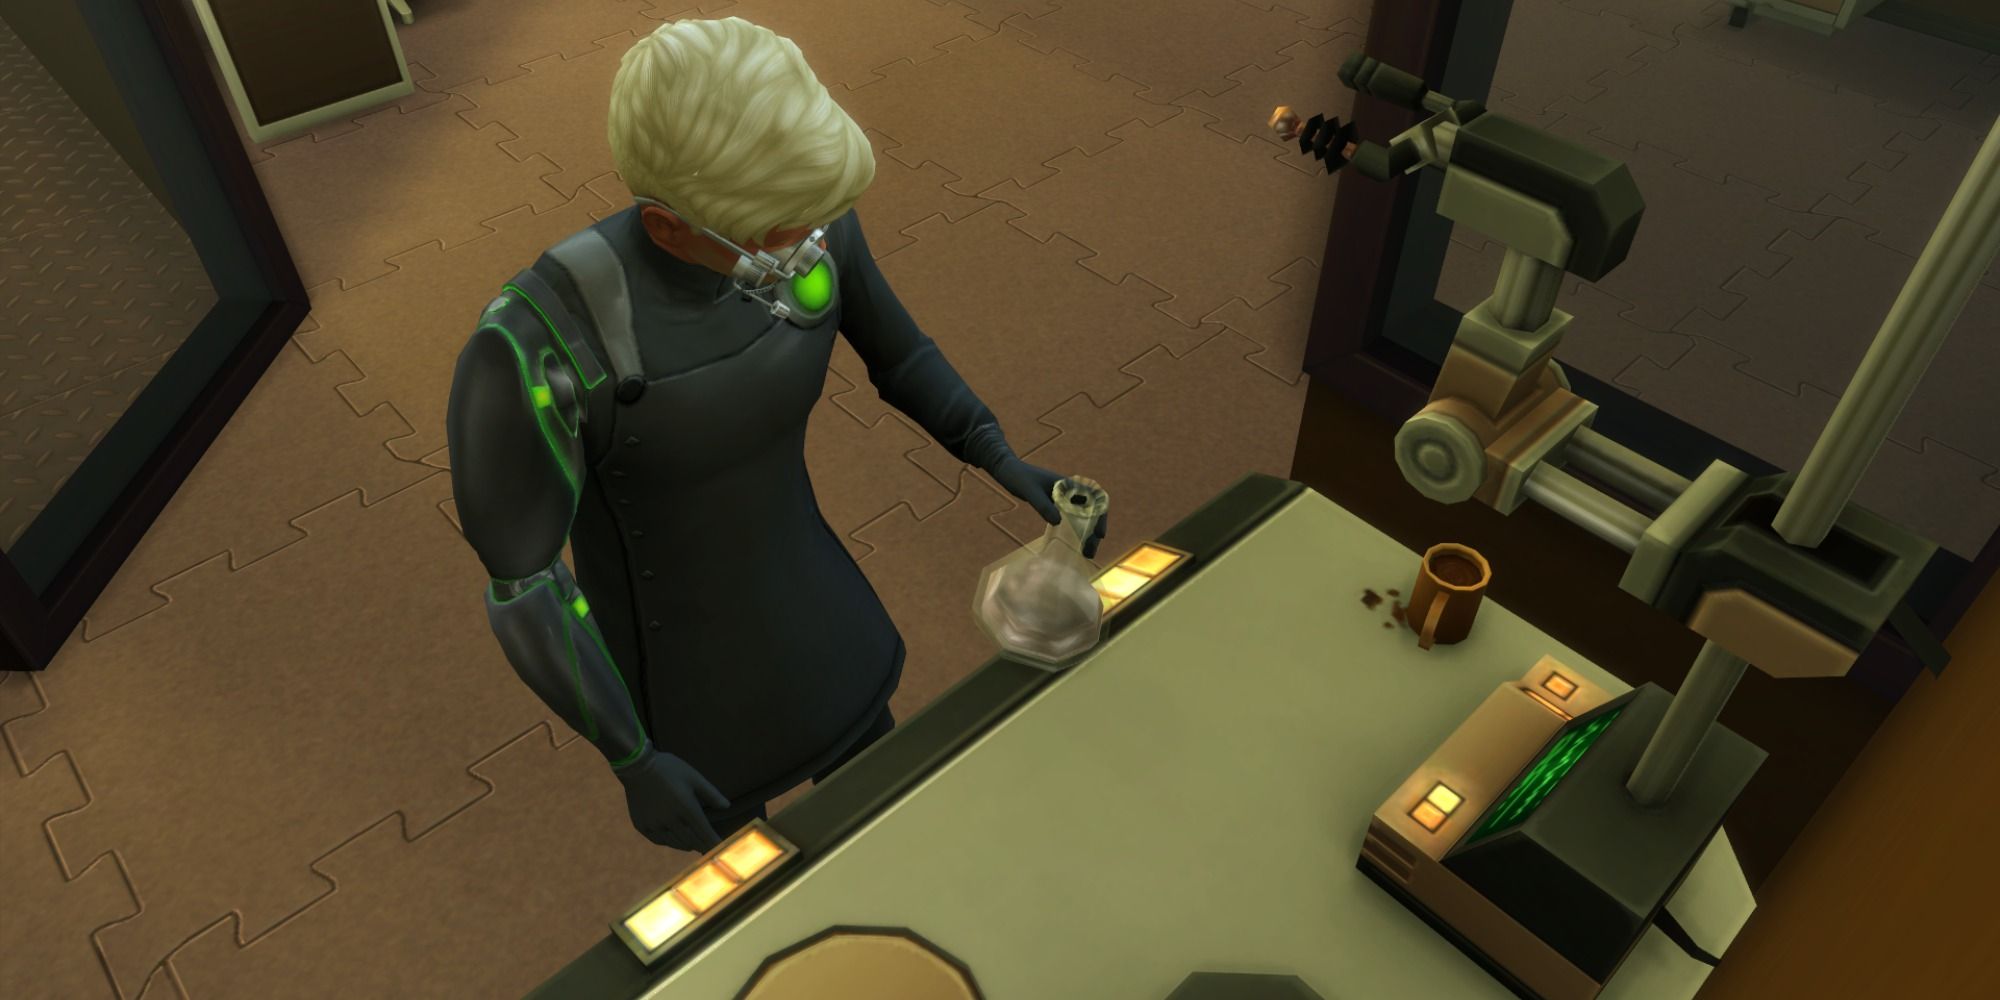 Sims 4 Get To Work Guide To Scientist Career